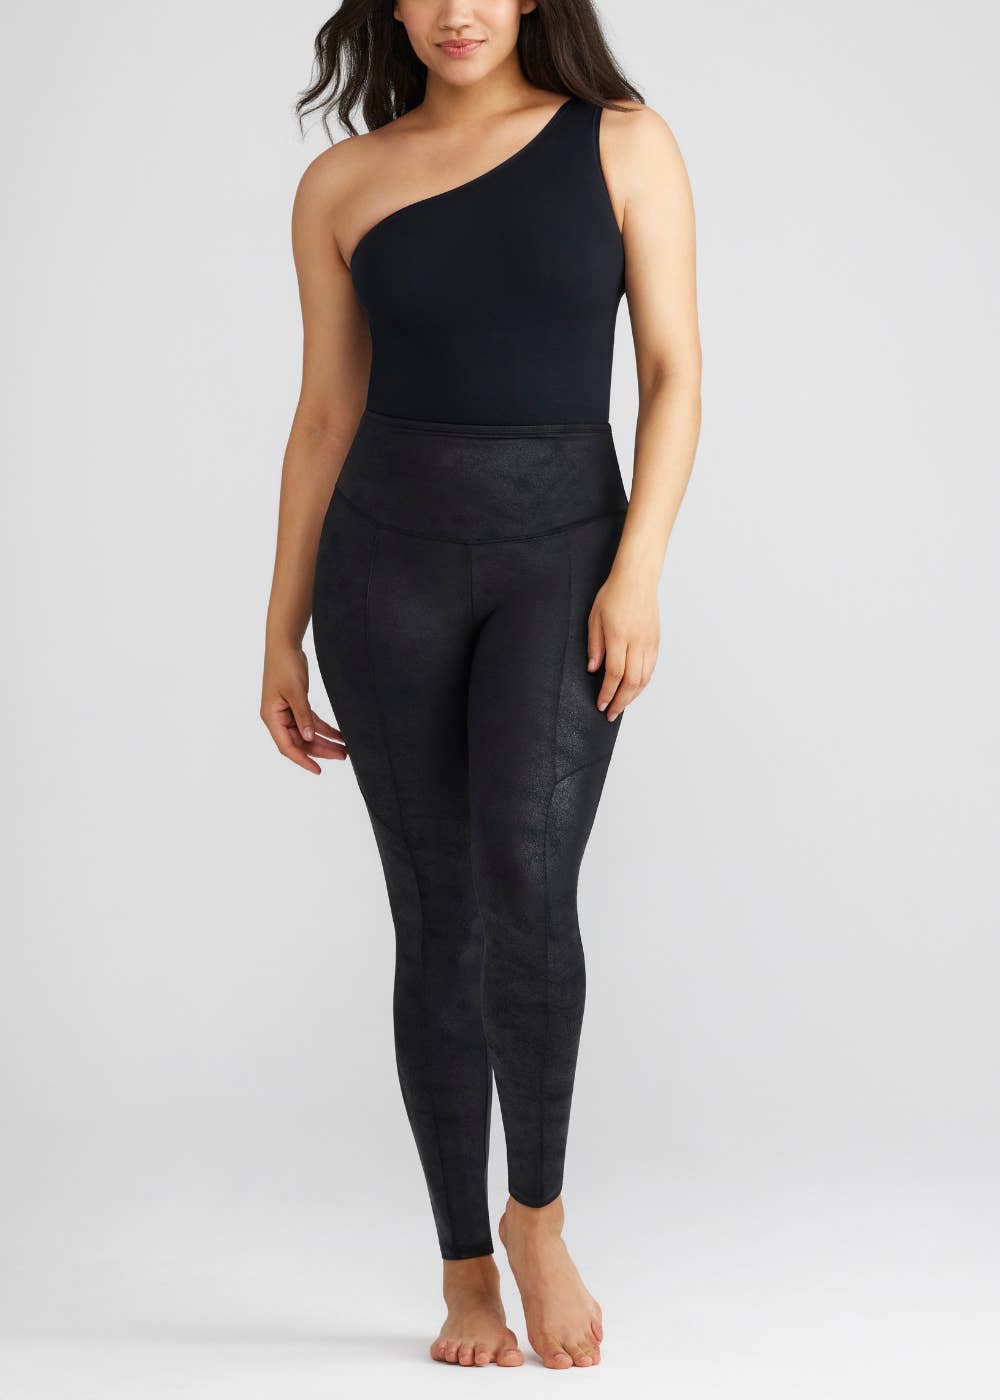 Stretch and Shine Faux Leather Shaping Legging - Yummie